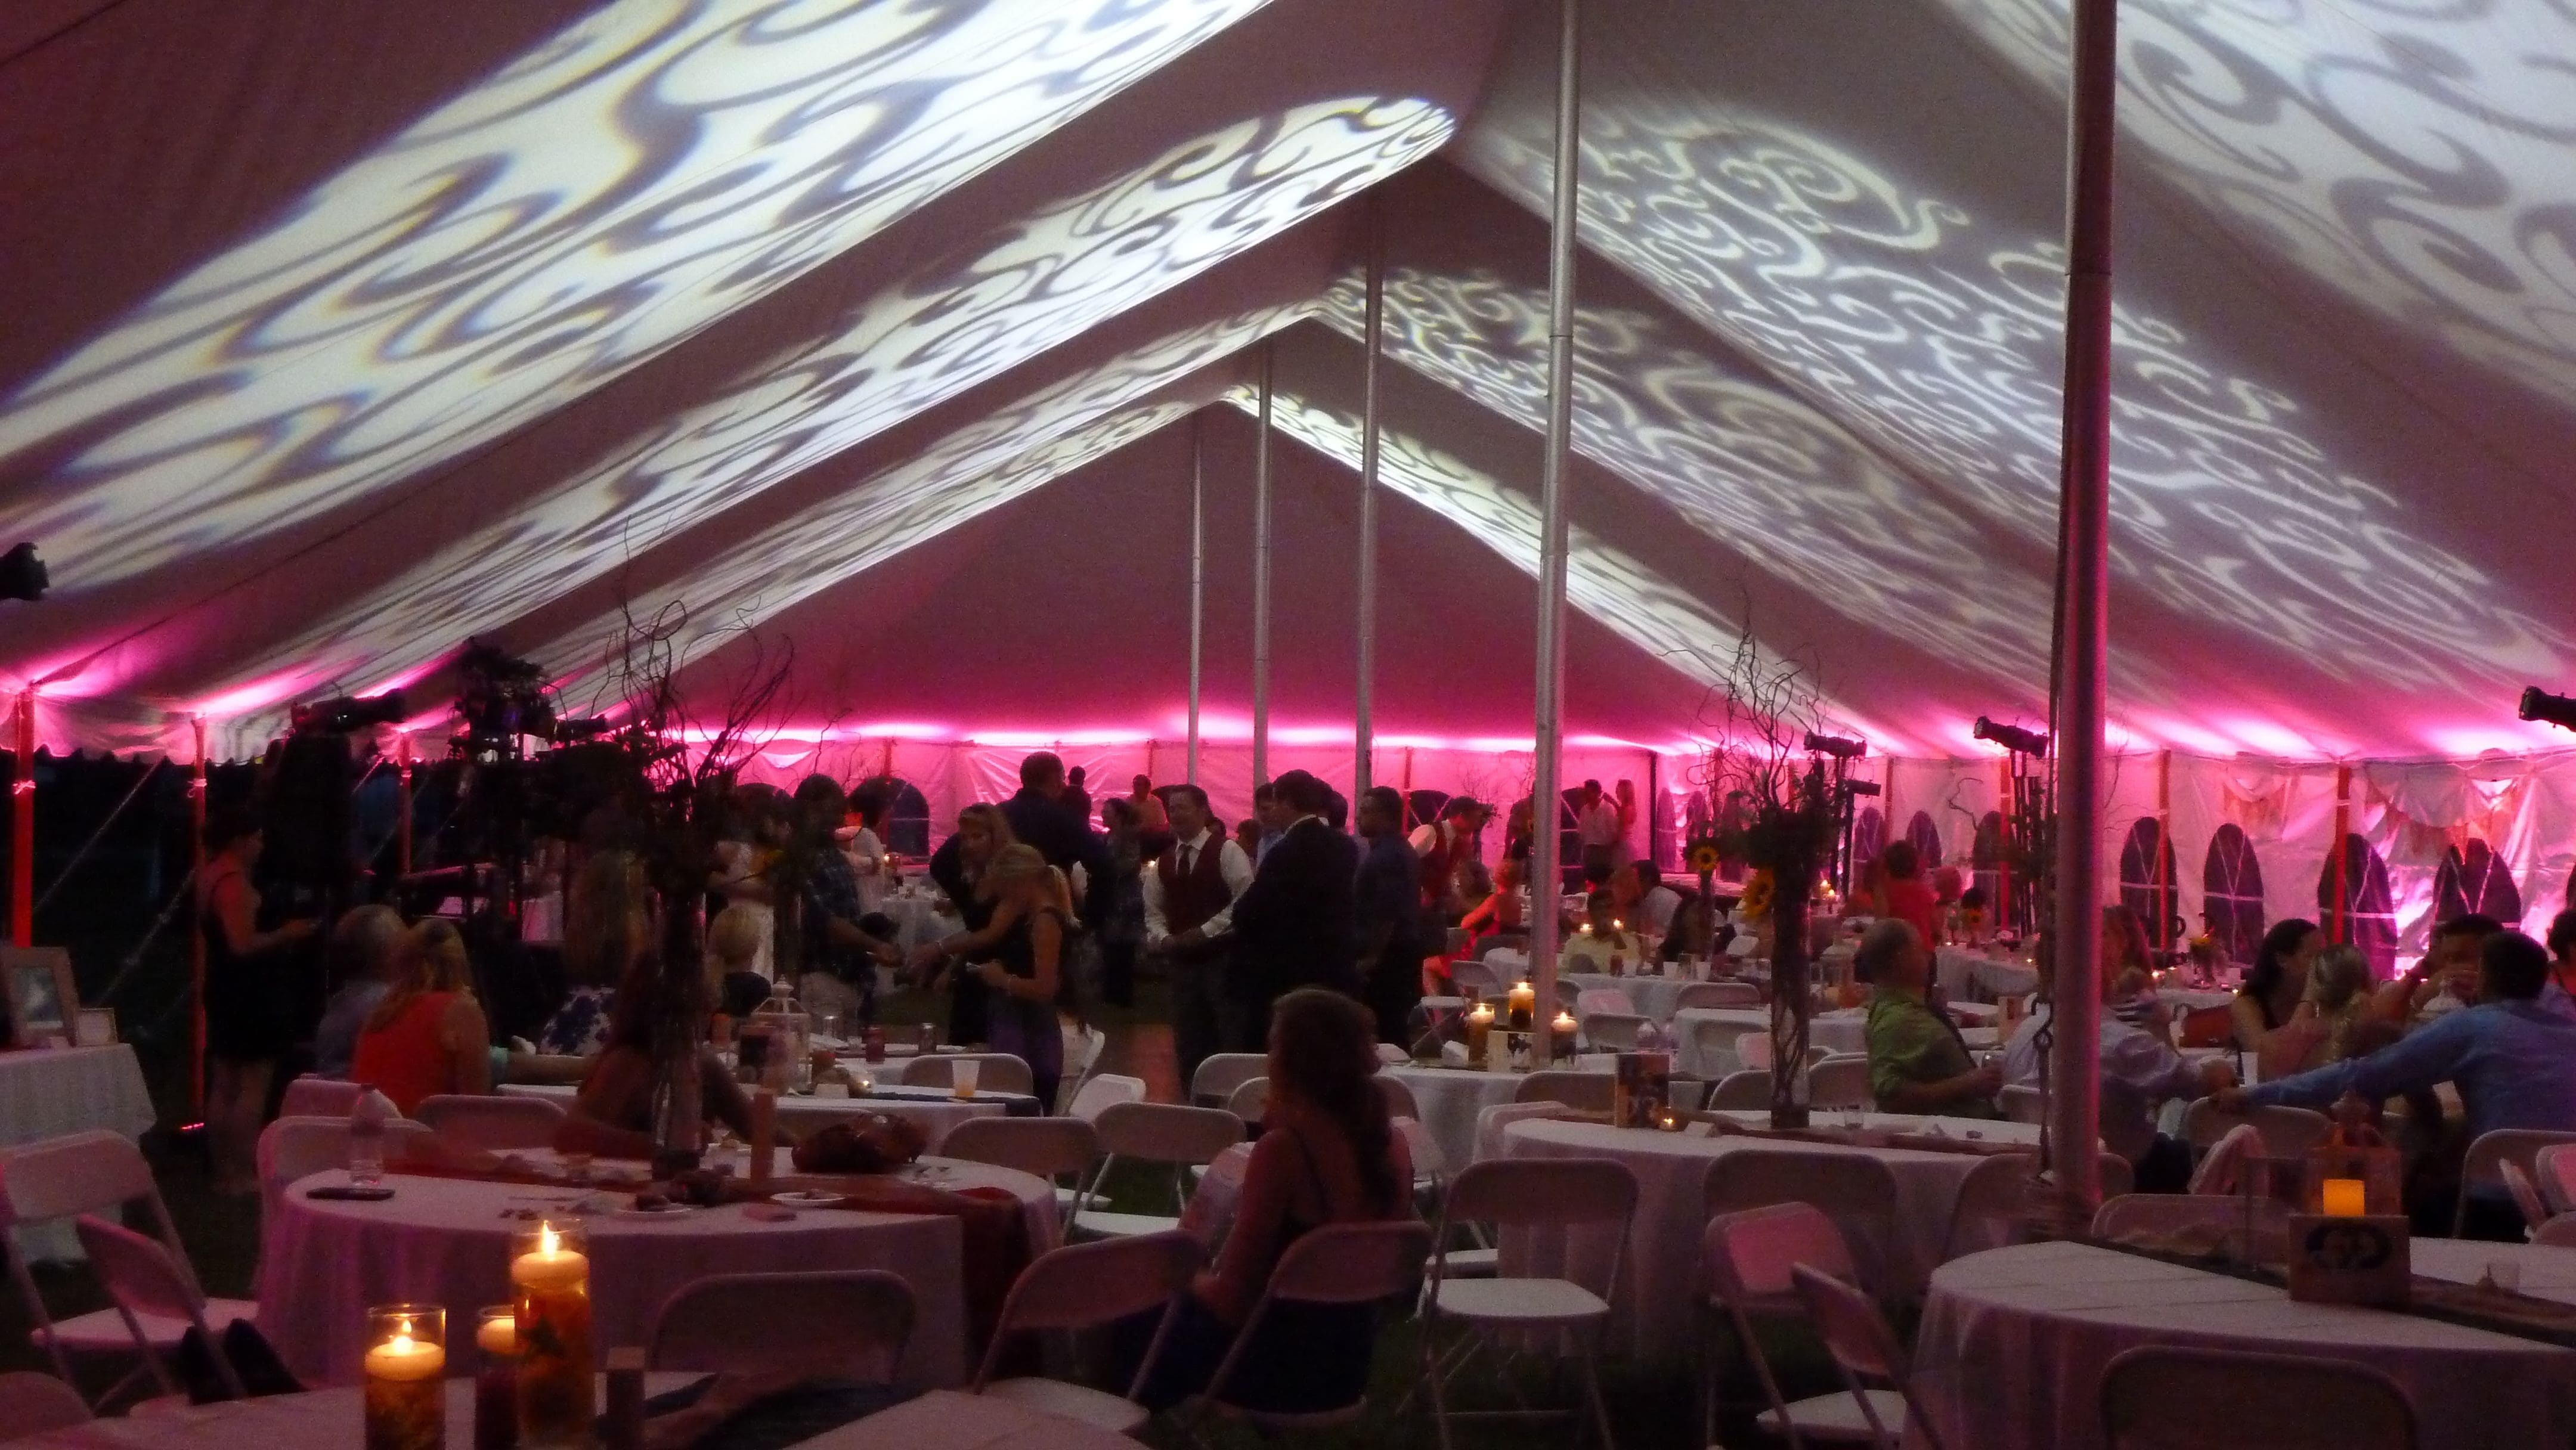 Fancy gobo patterns on the tent ceiling for a wedding.